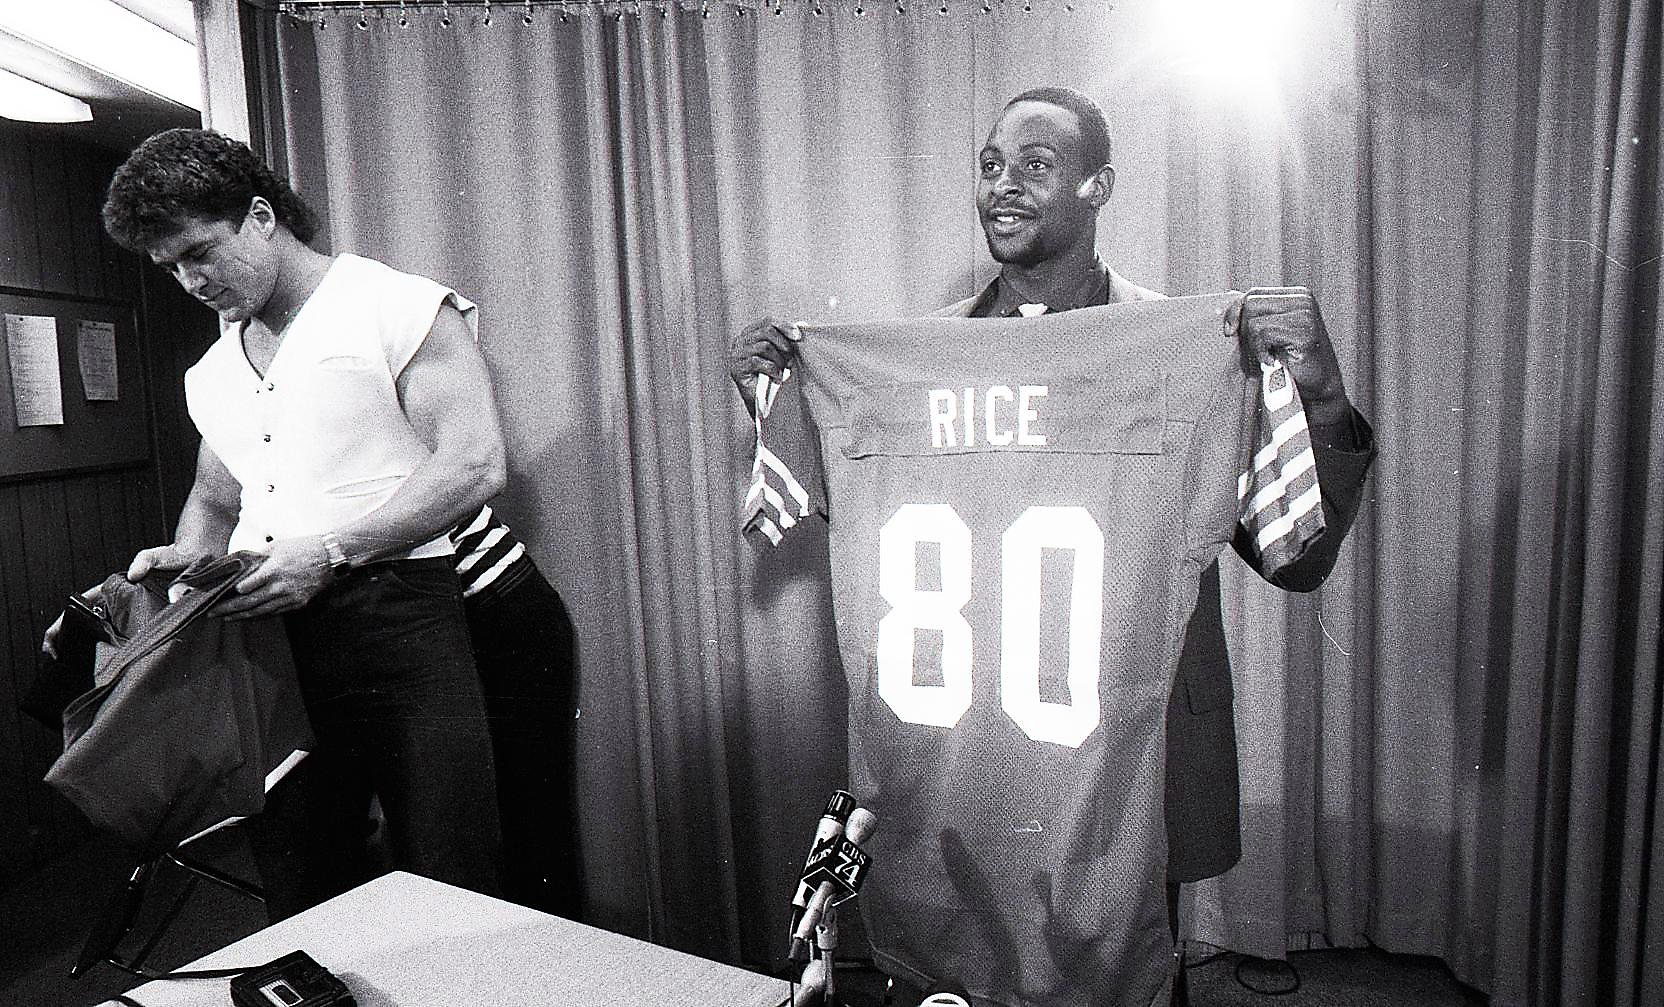 See Jerry Rice's first photos as a 49er (taken after his first